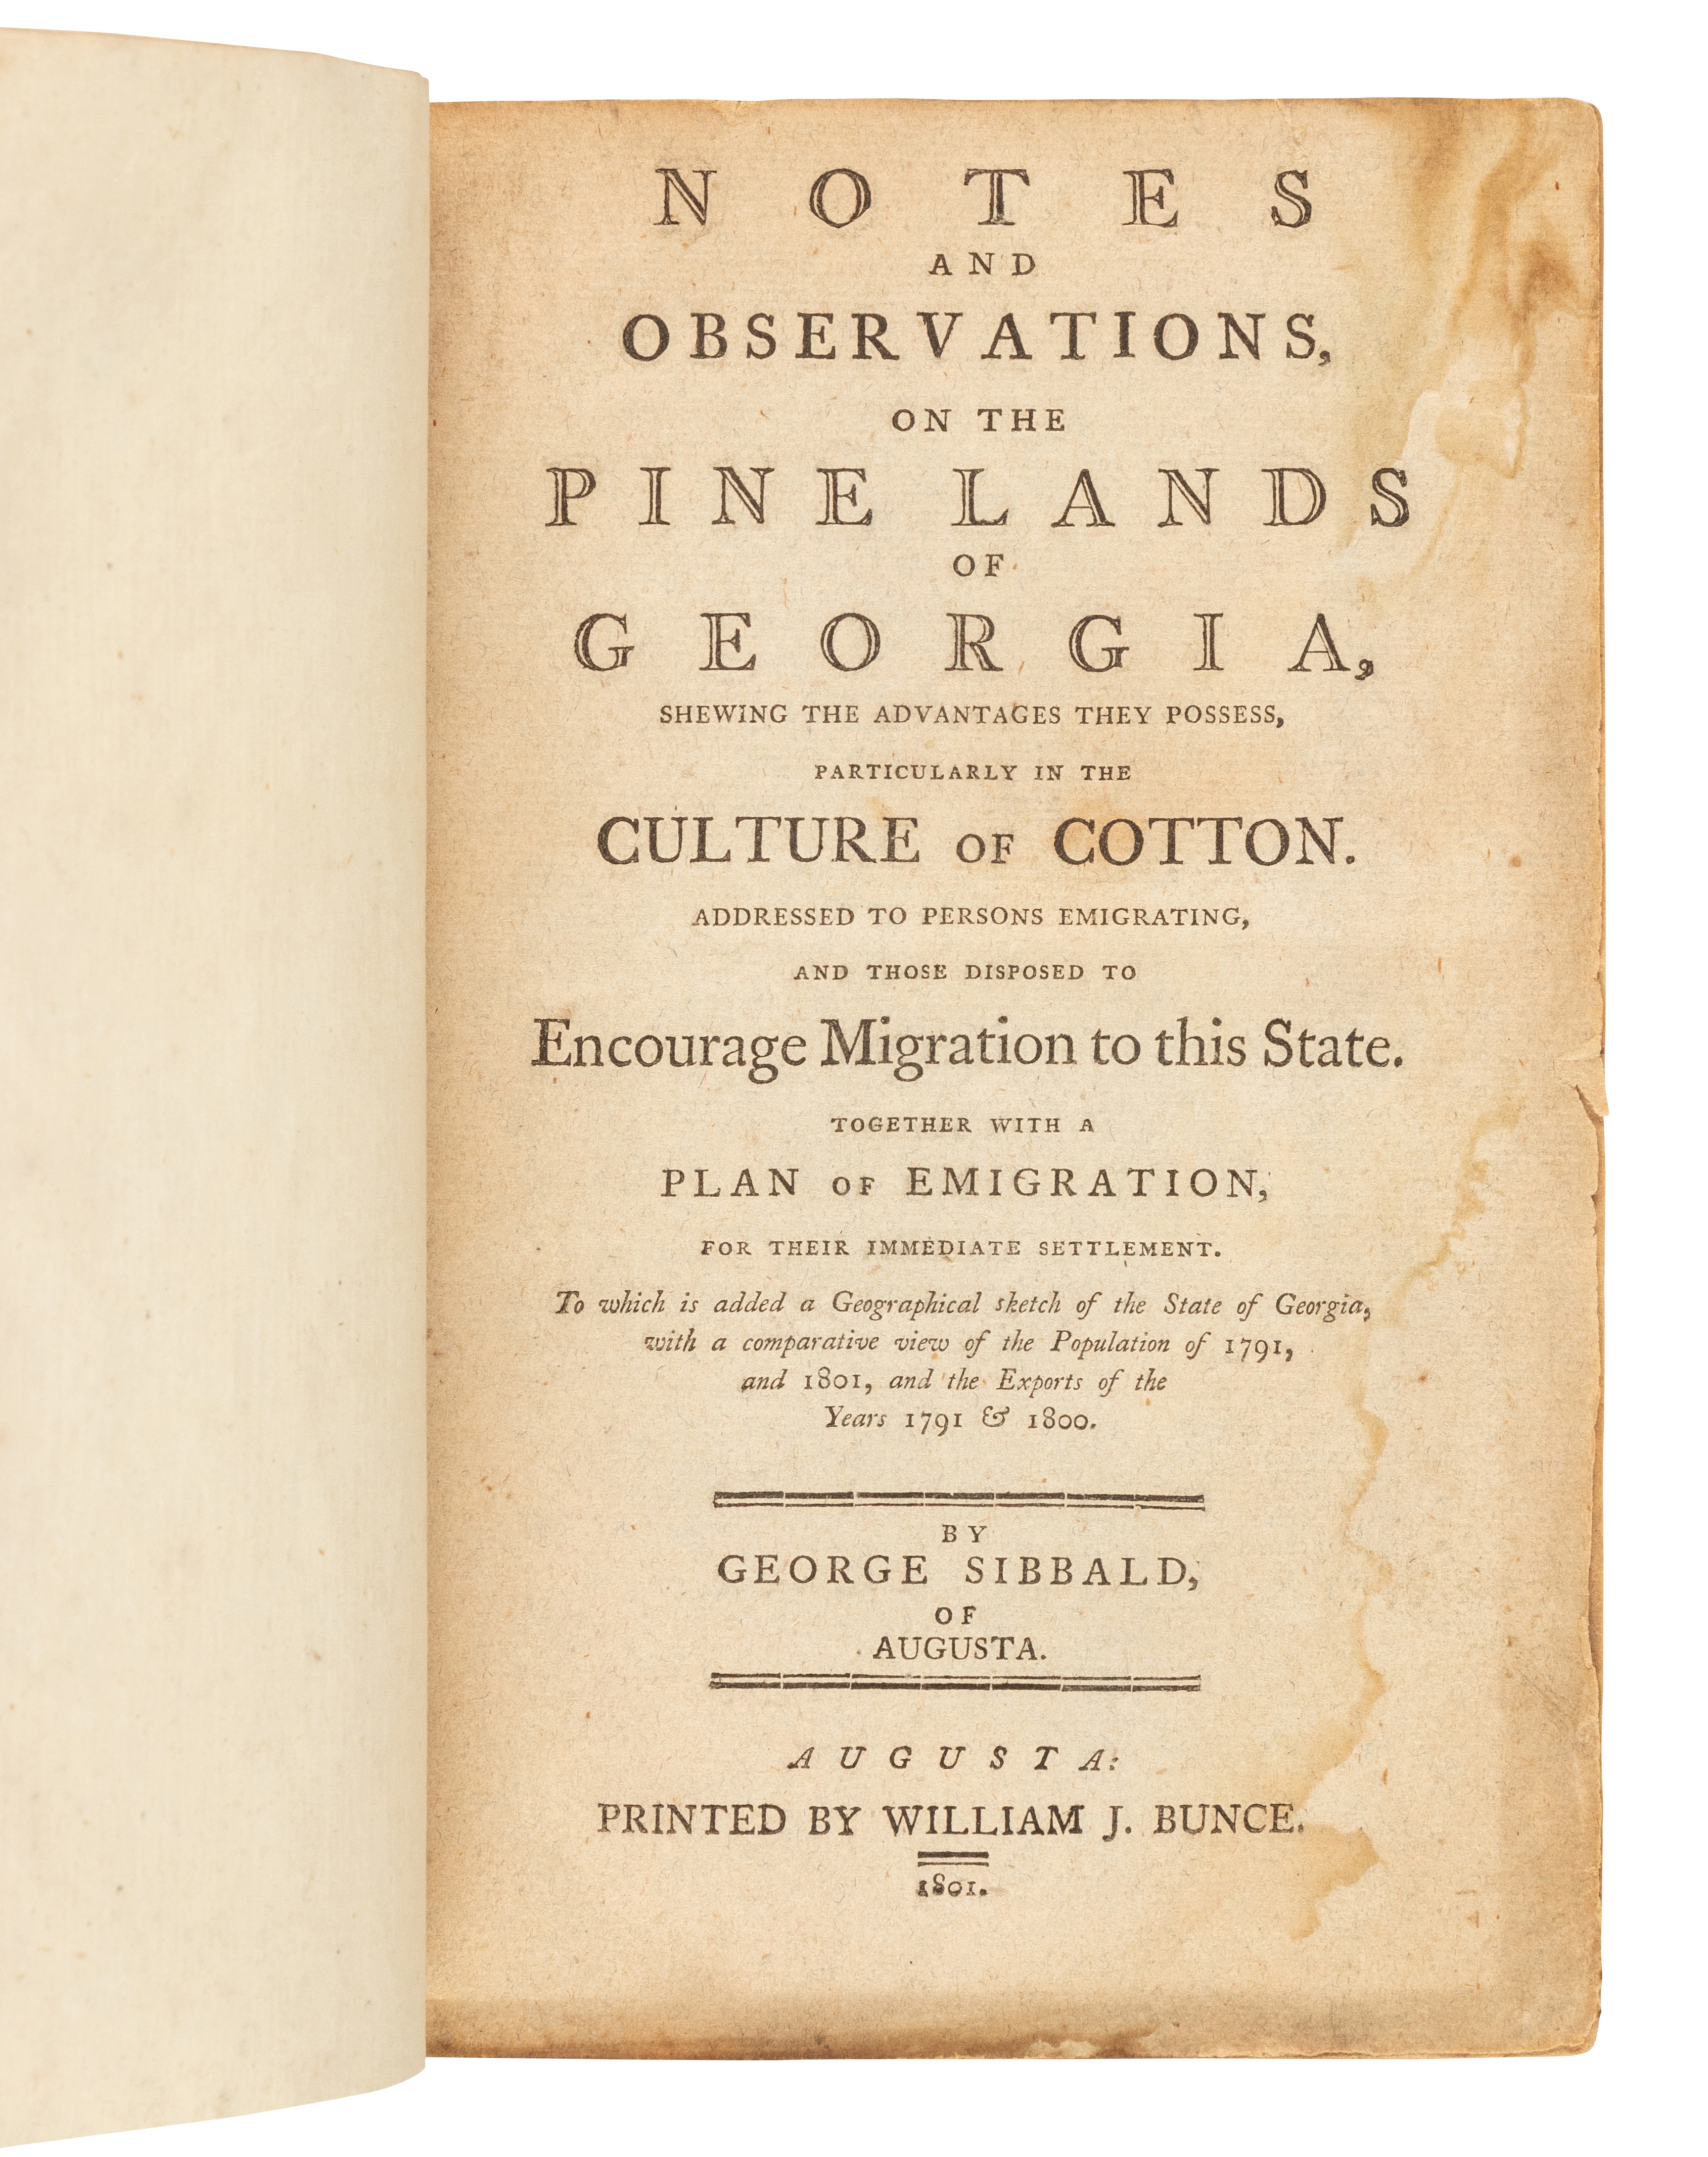 [GEORGIA]. SIBBALD, George. Notes and Observations, on the Pine Lands of Georgia. Augusta, GA: Willi